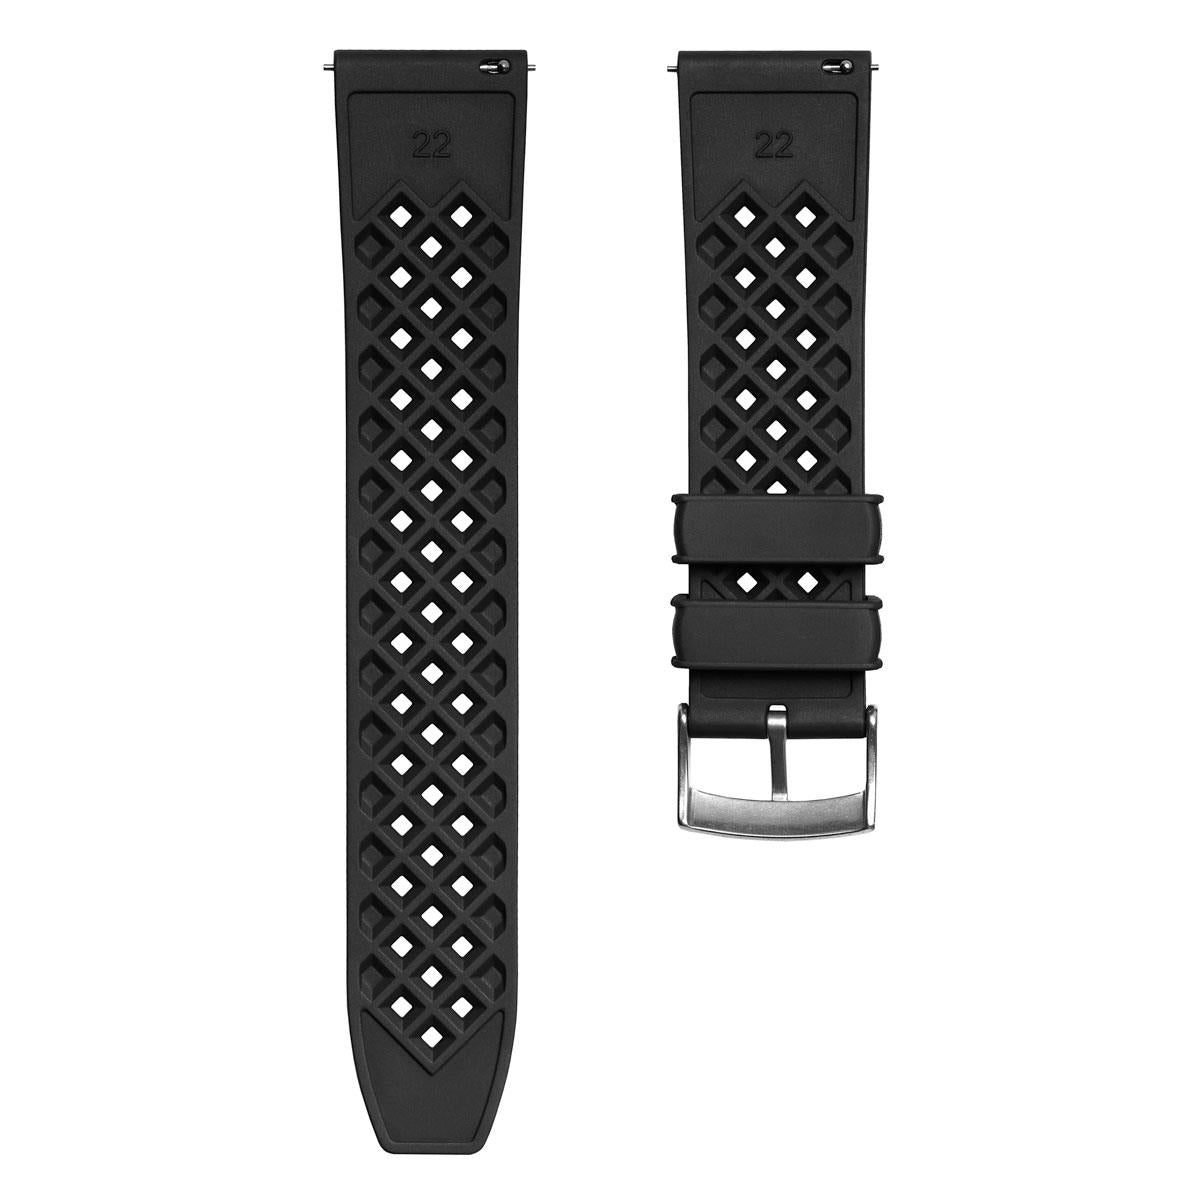 Watch Strap World TAG Heuer replacement strap